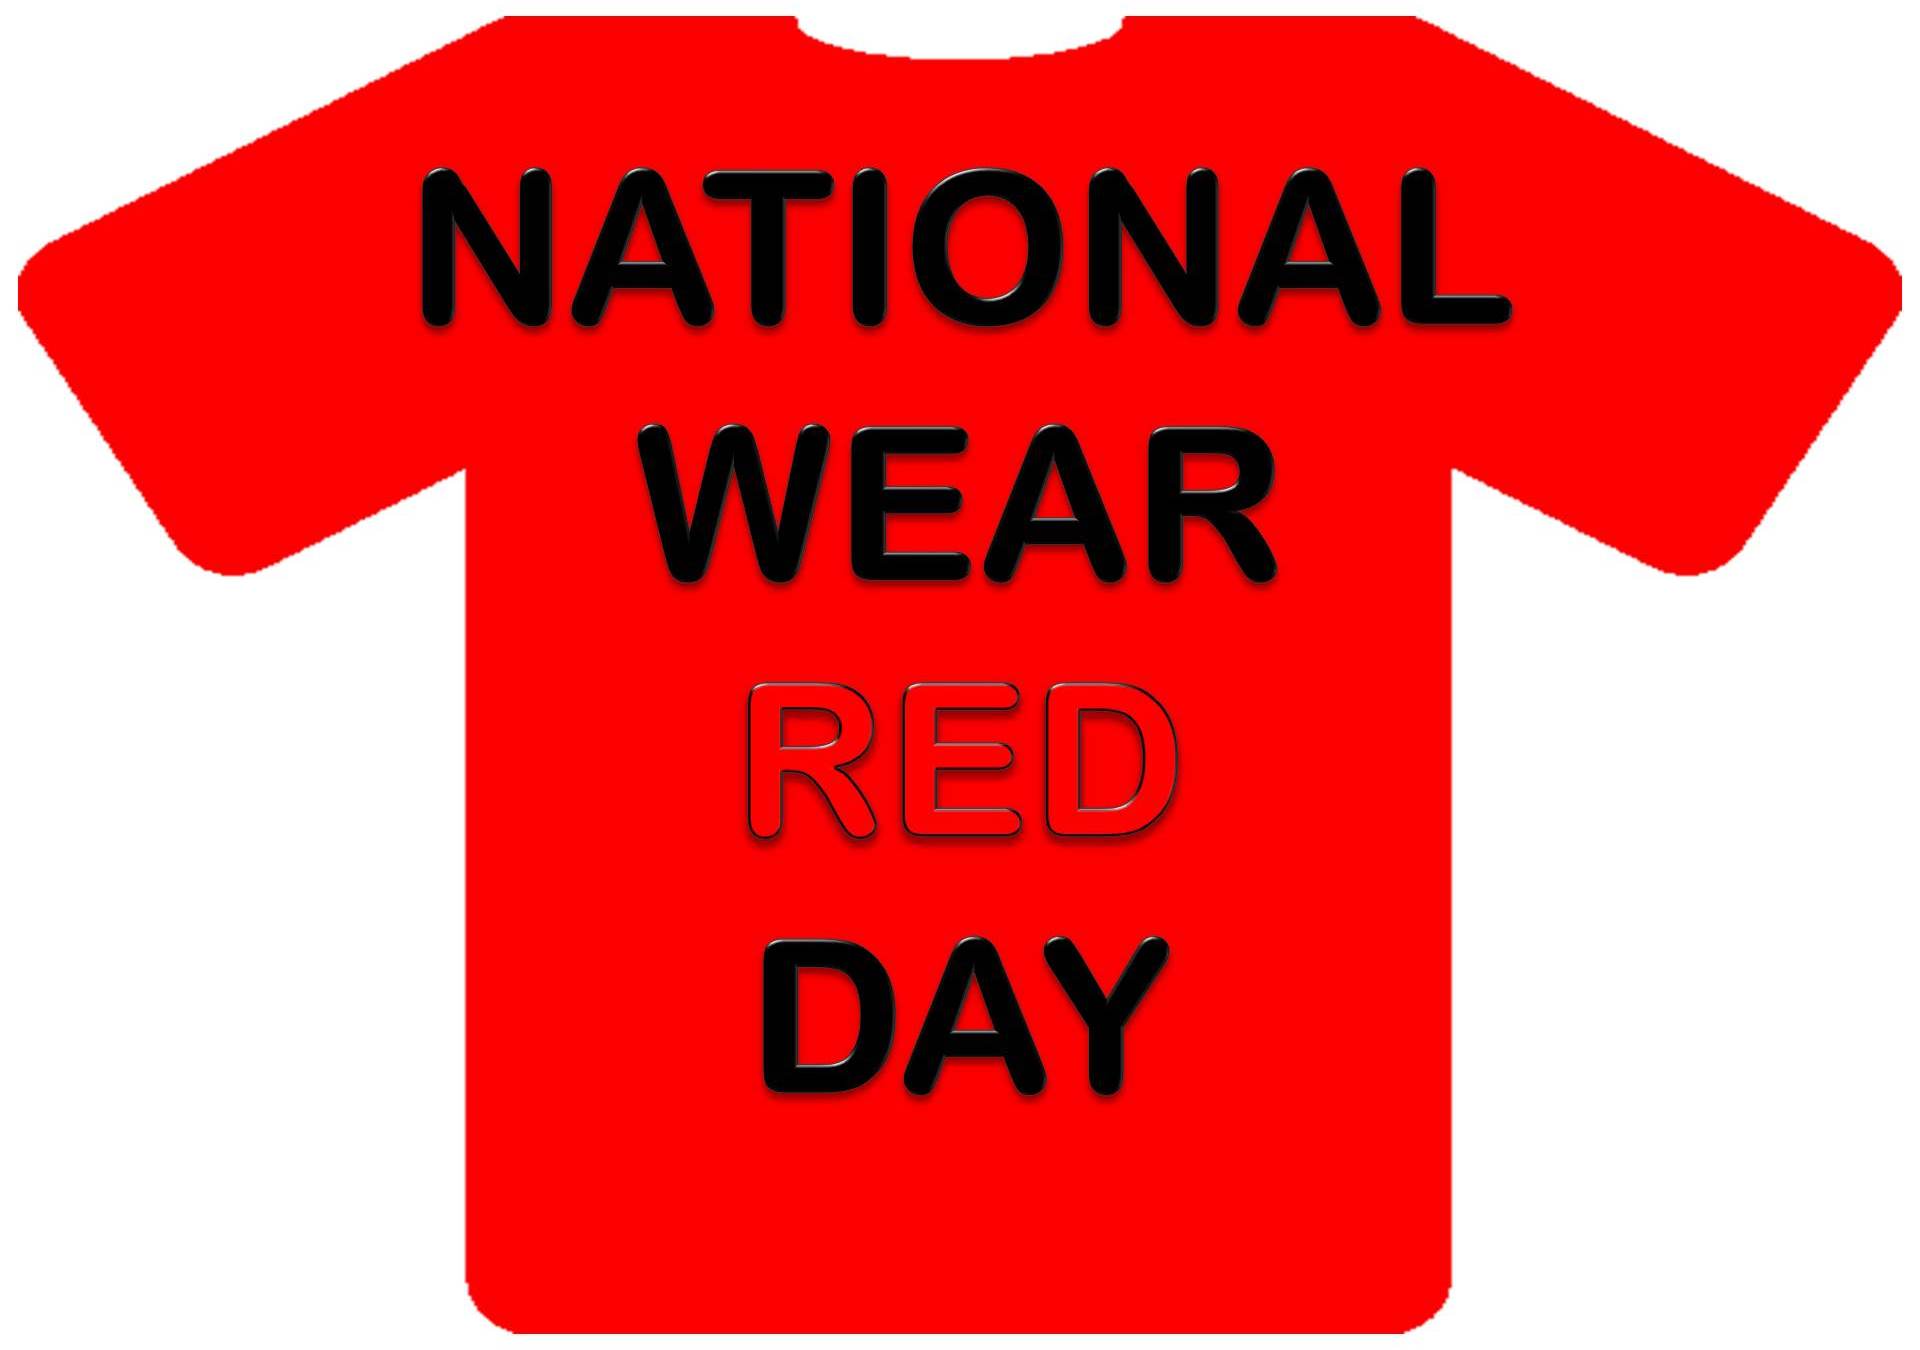 National Wear Red Day 2015